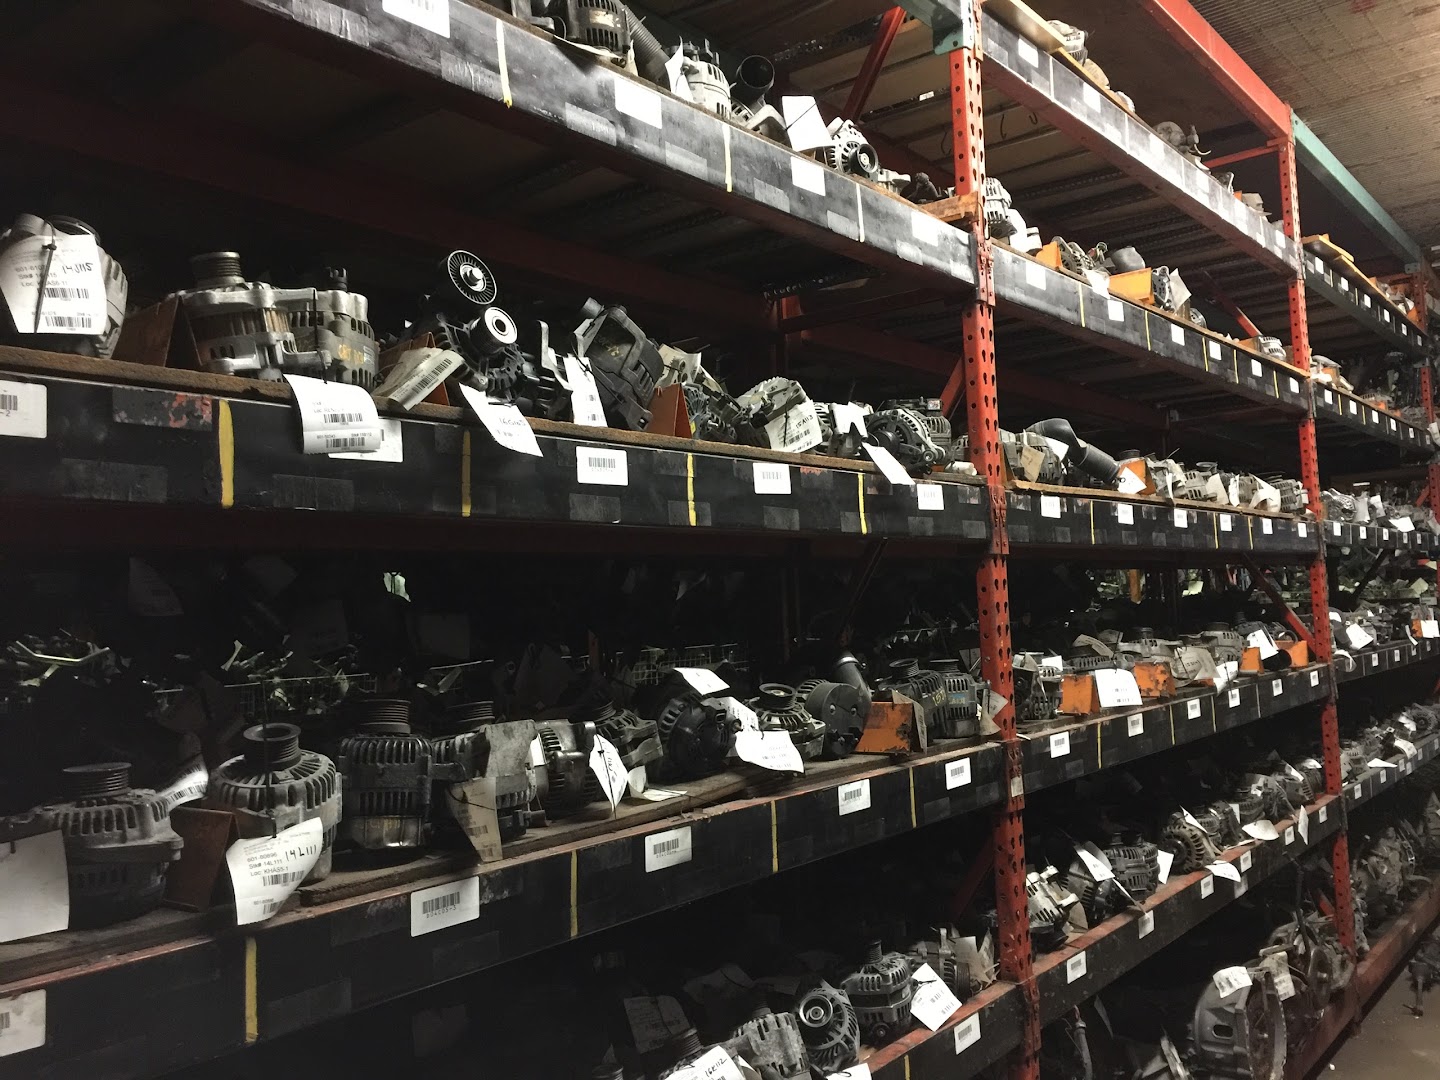 Used auto parts store In Tampa FL 